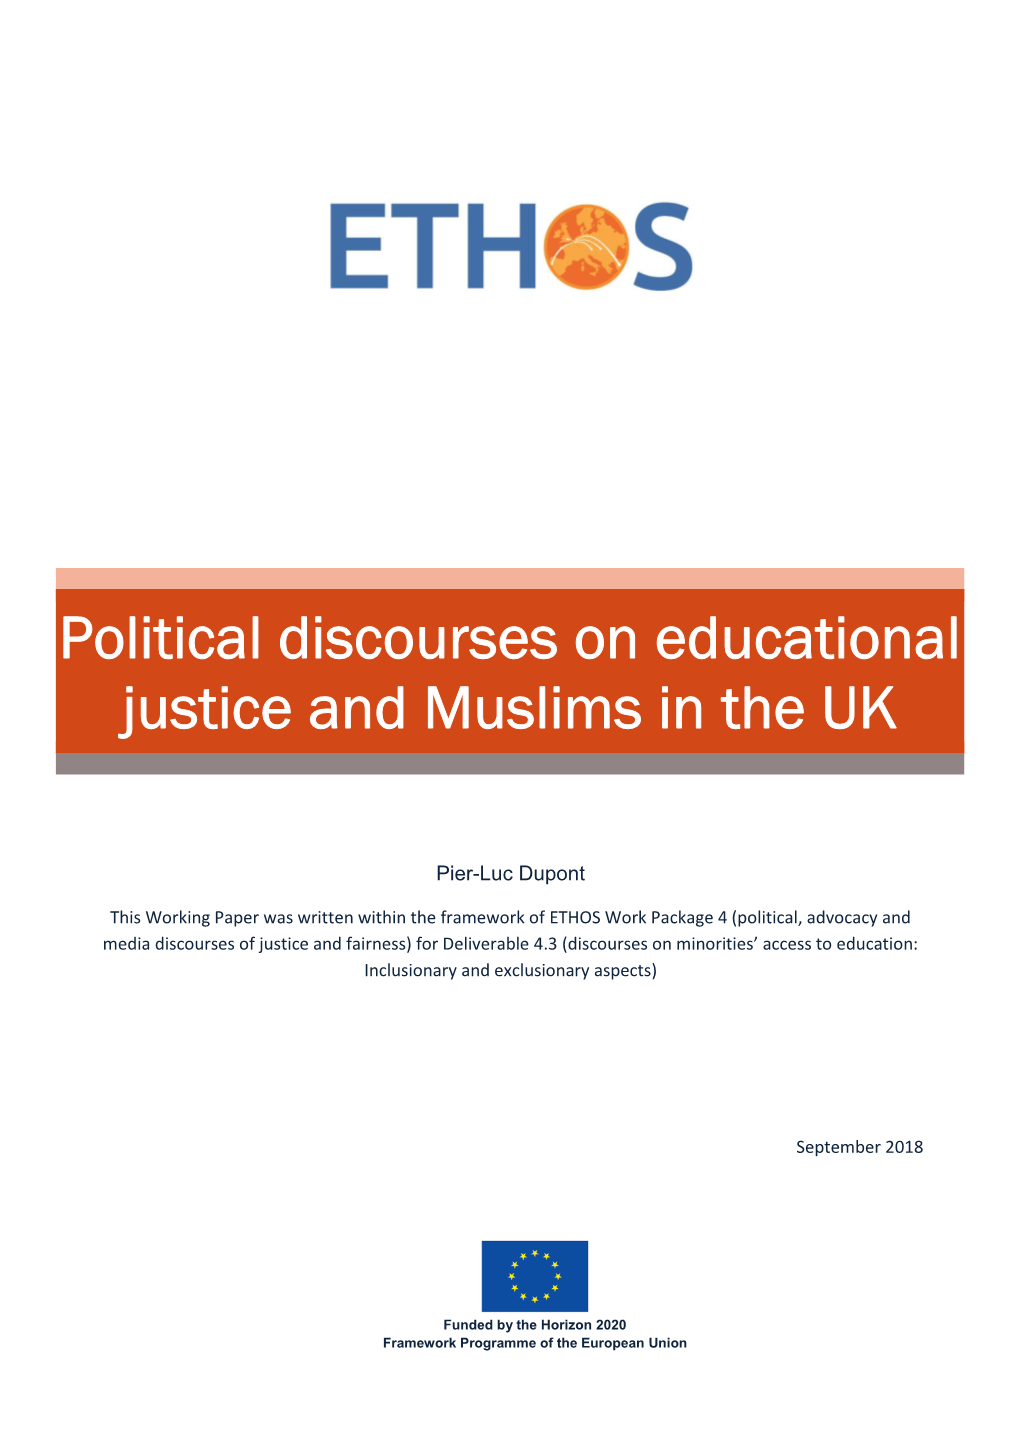 Political Discourses on Educational Justice and Muslims in the UK